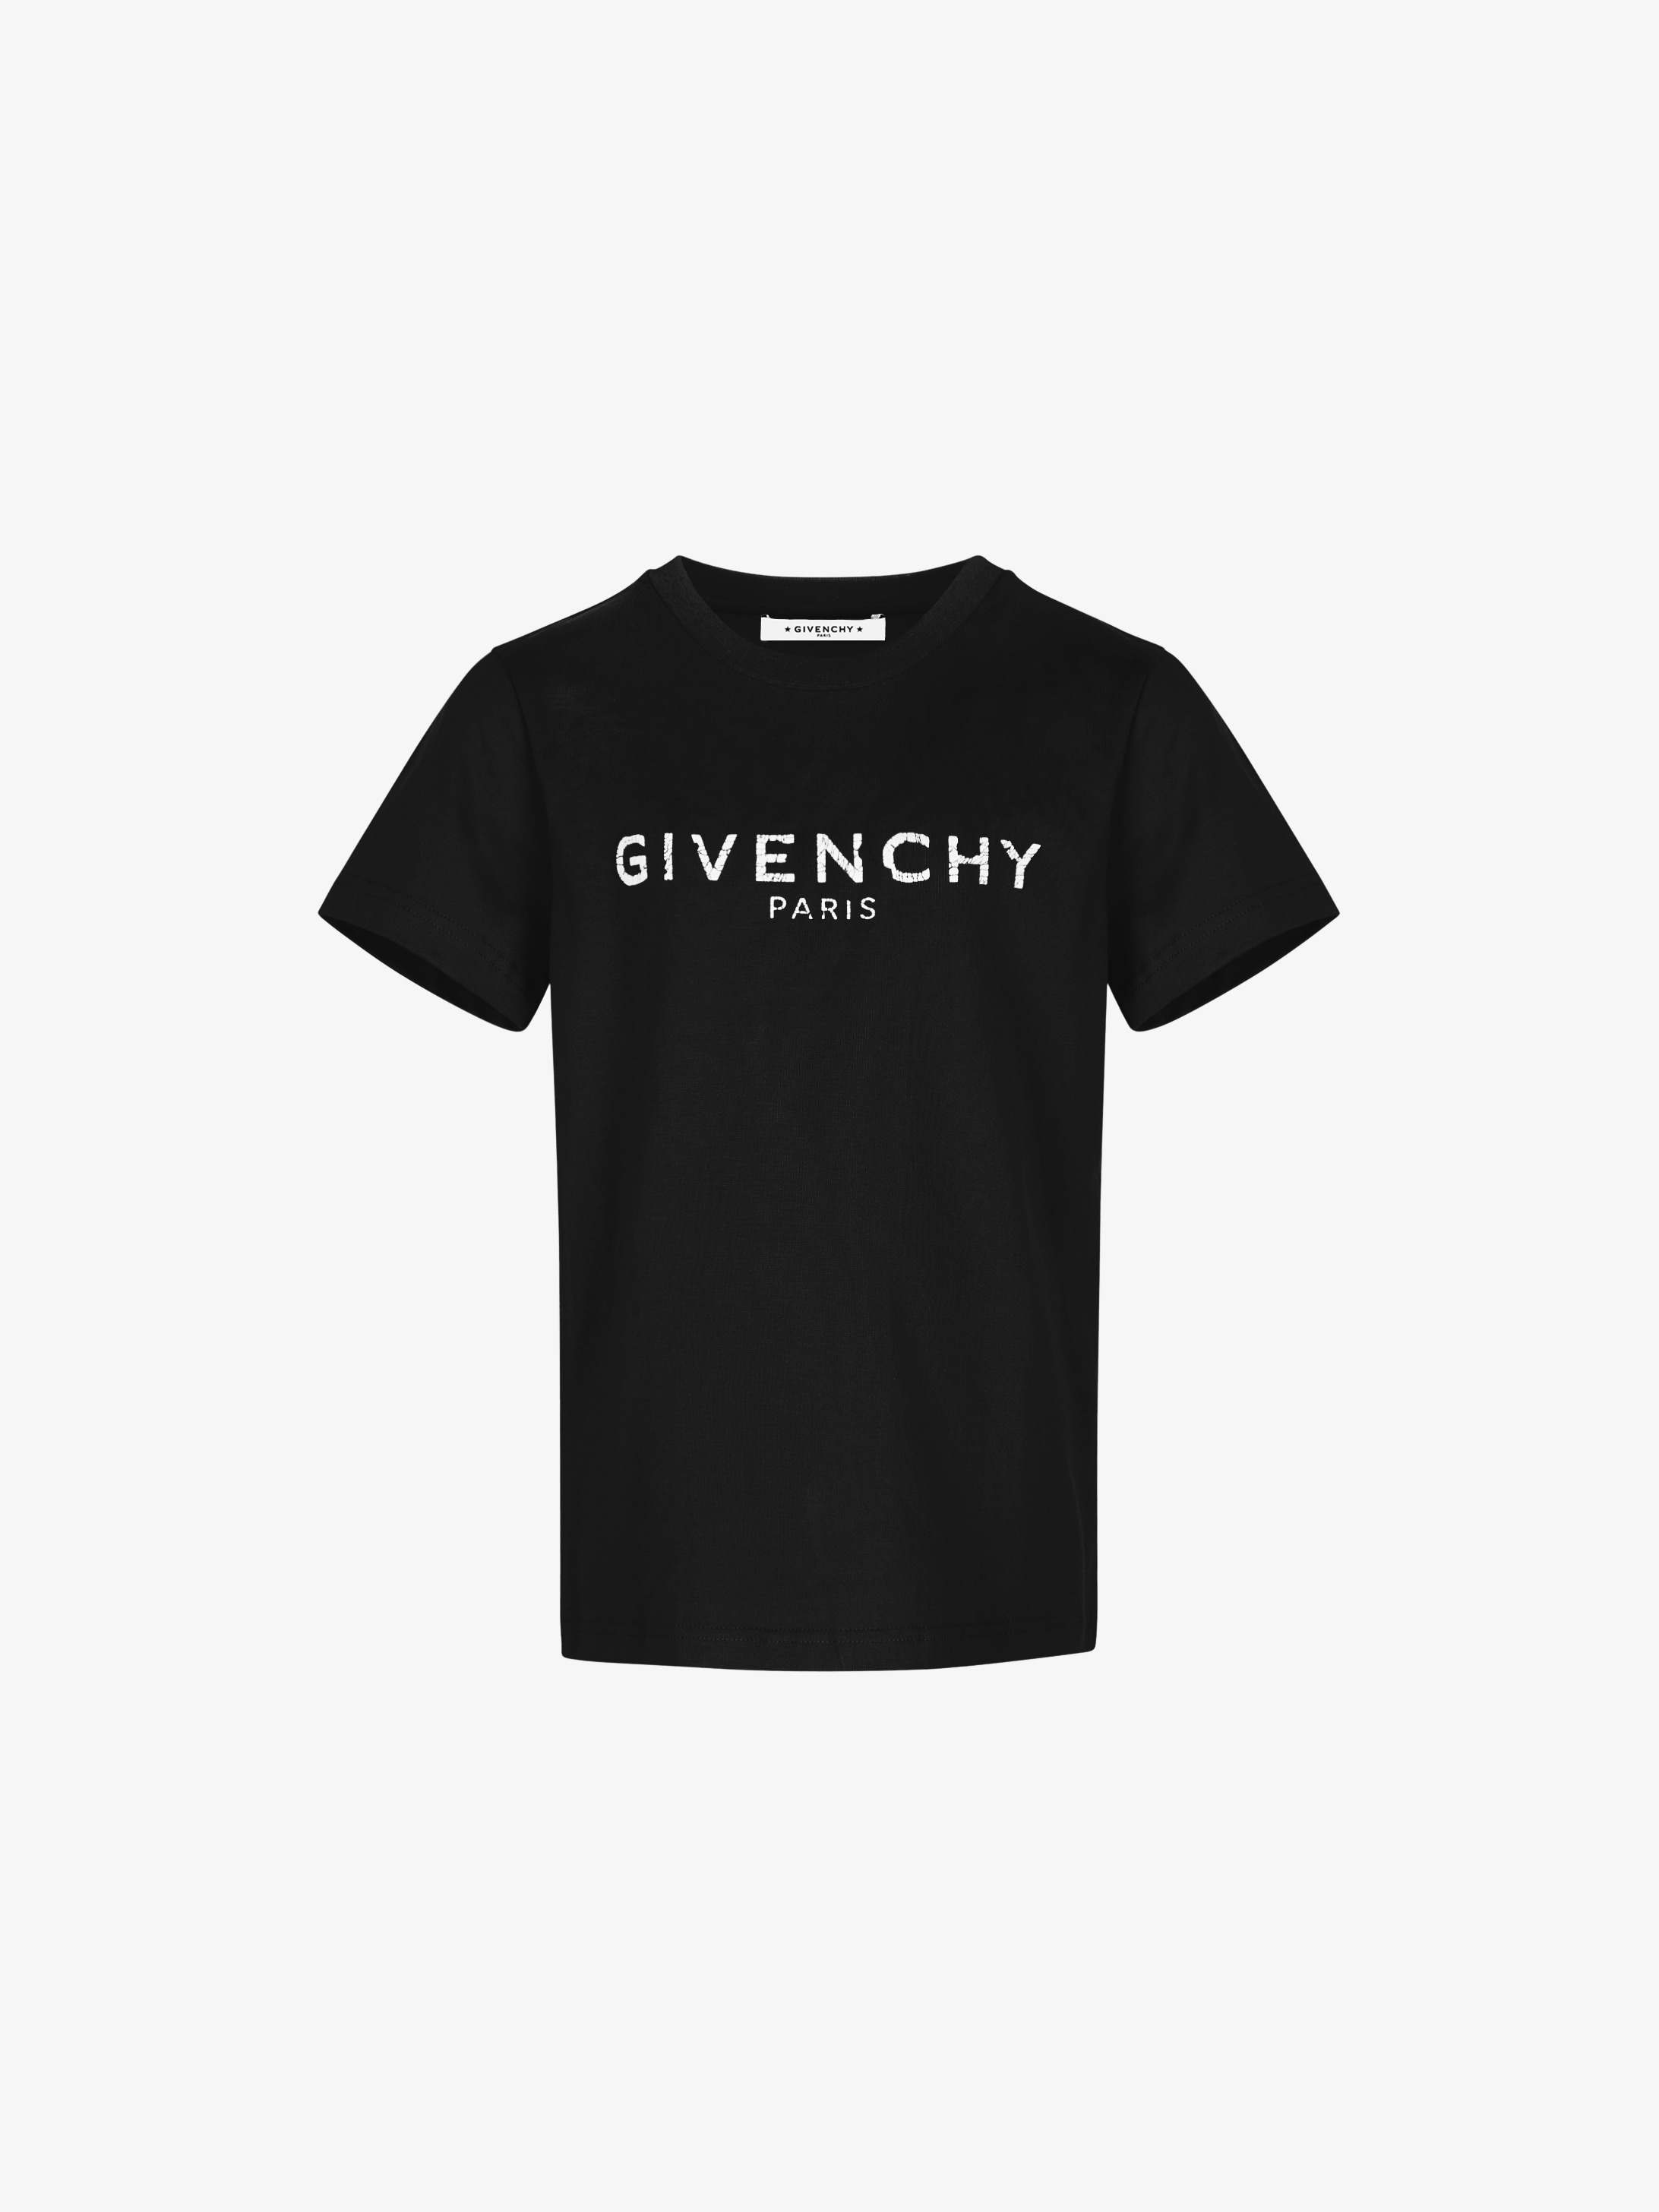 givenchy black and white t shirt